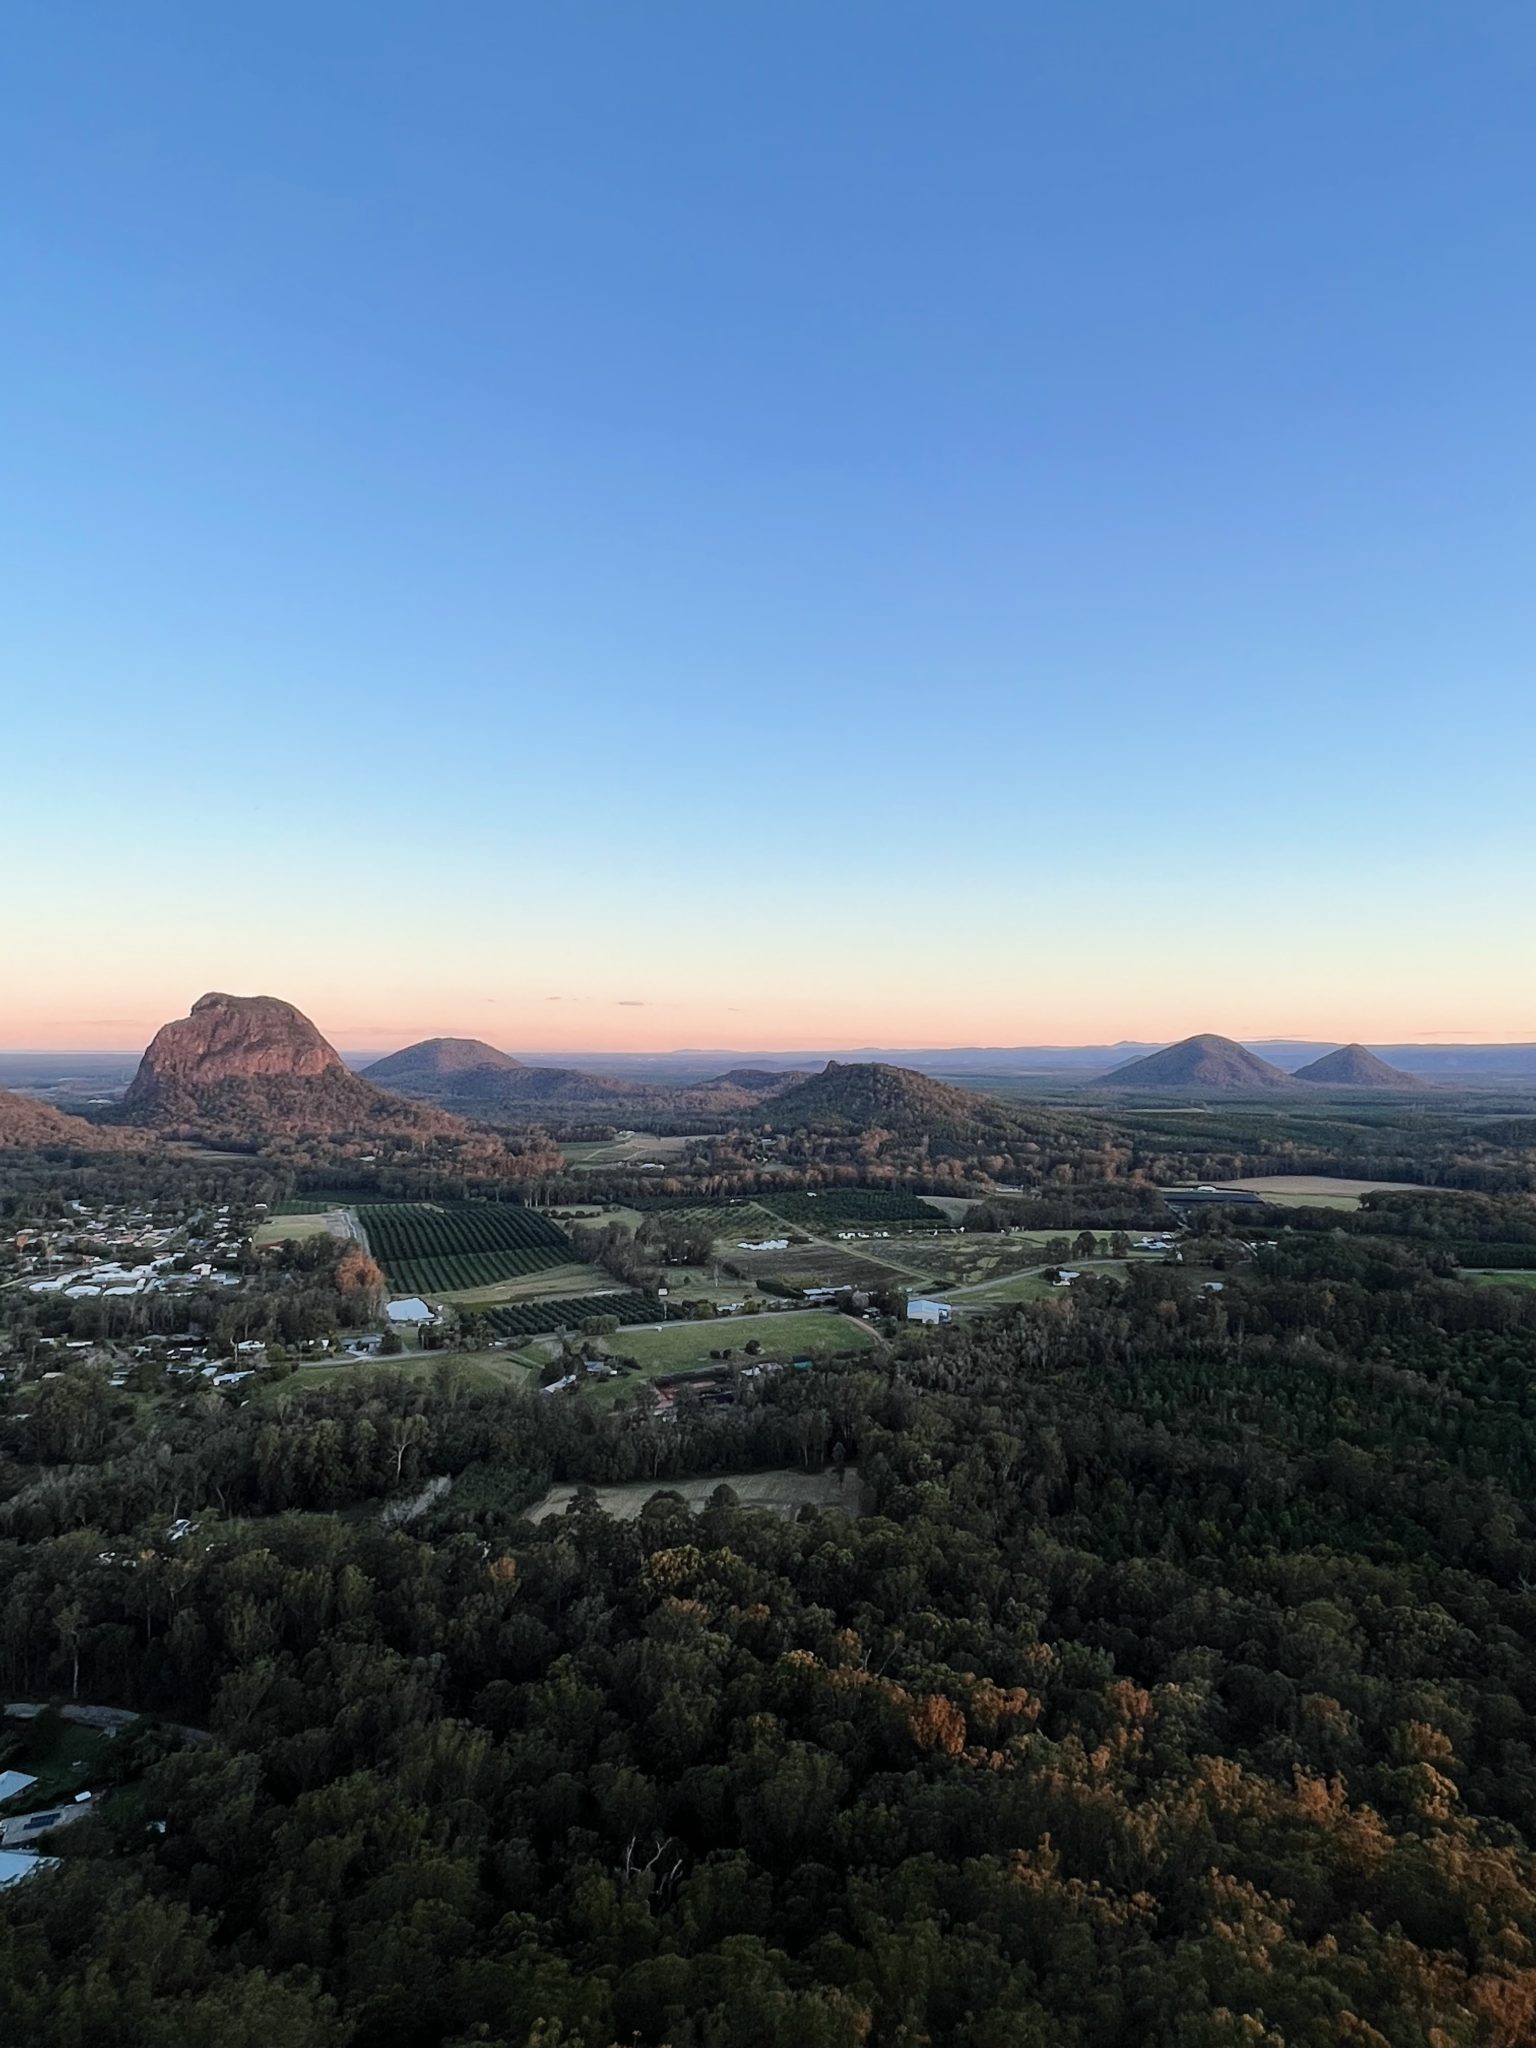 How to spend a weekend in the Glasshouse Mountains